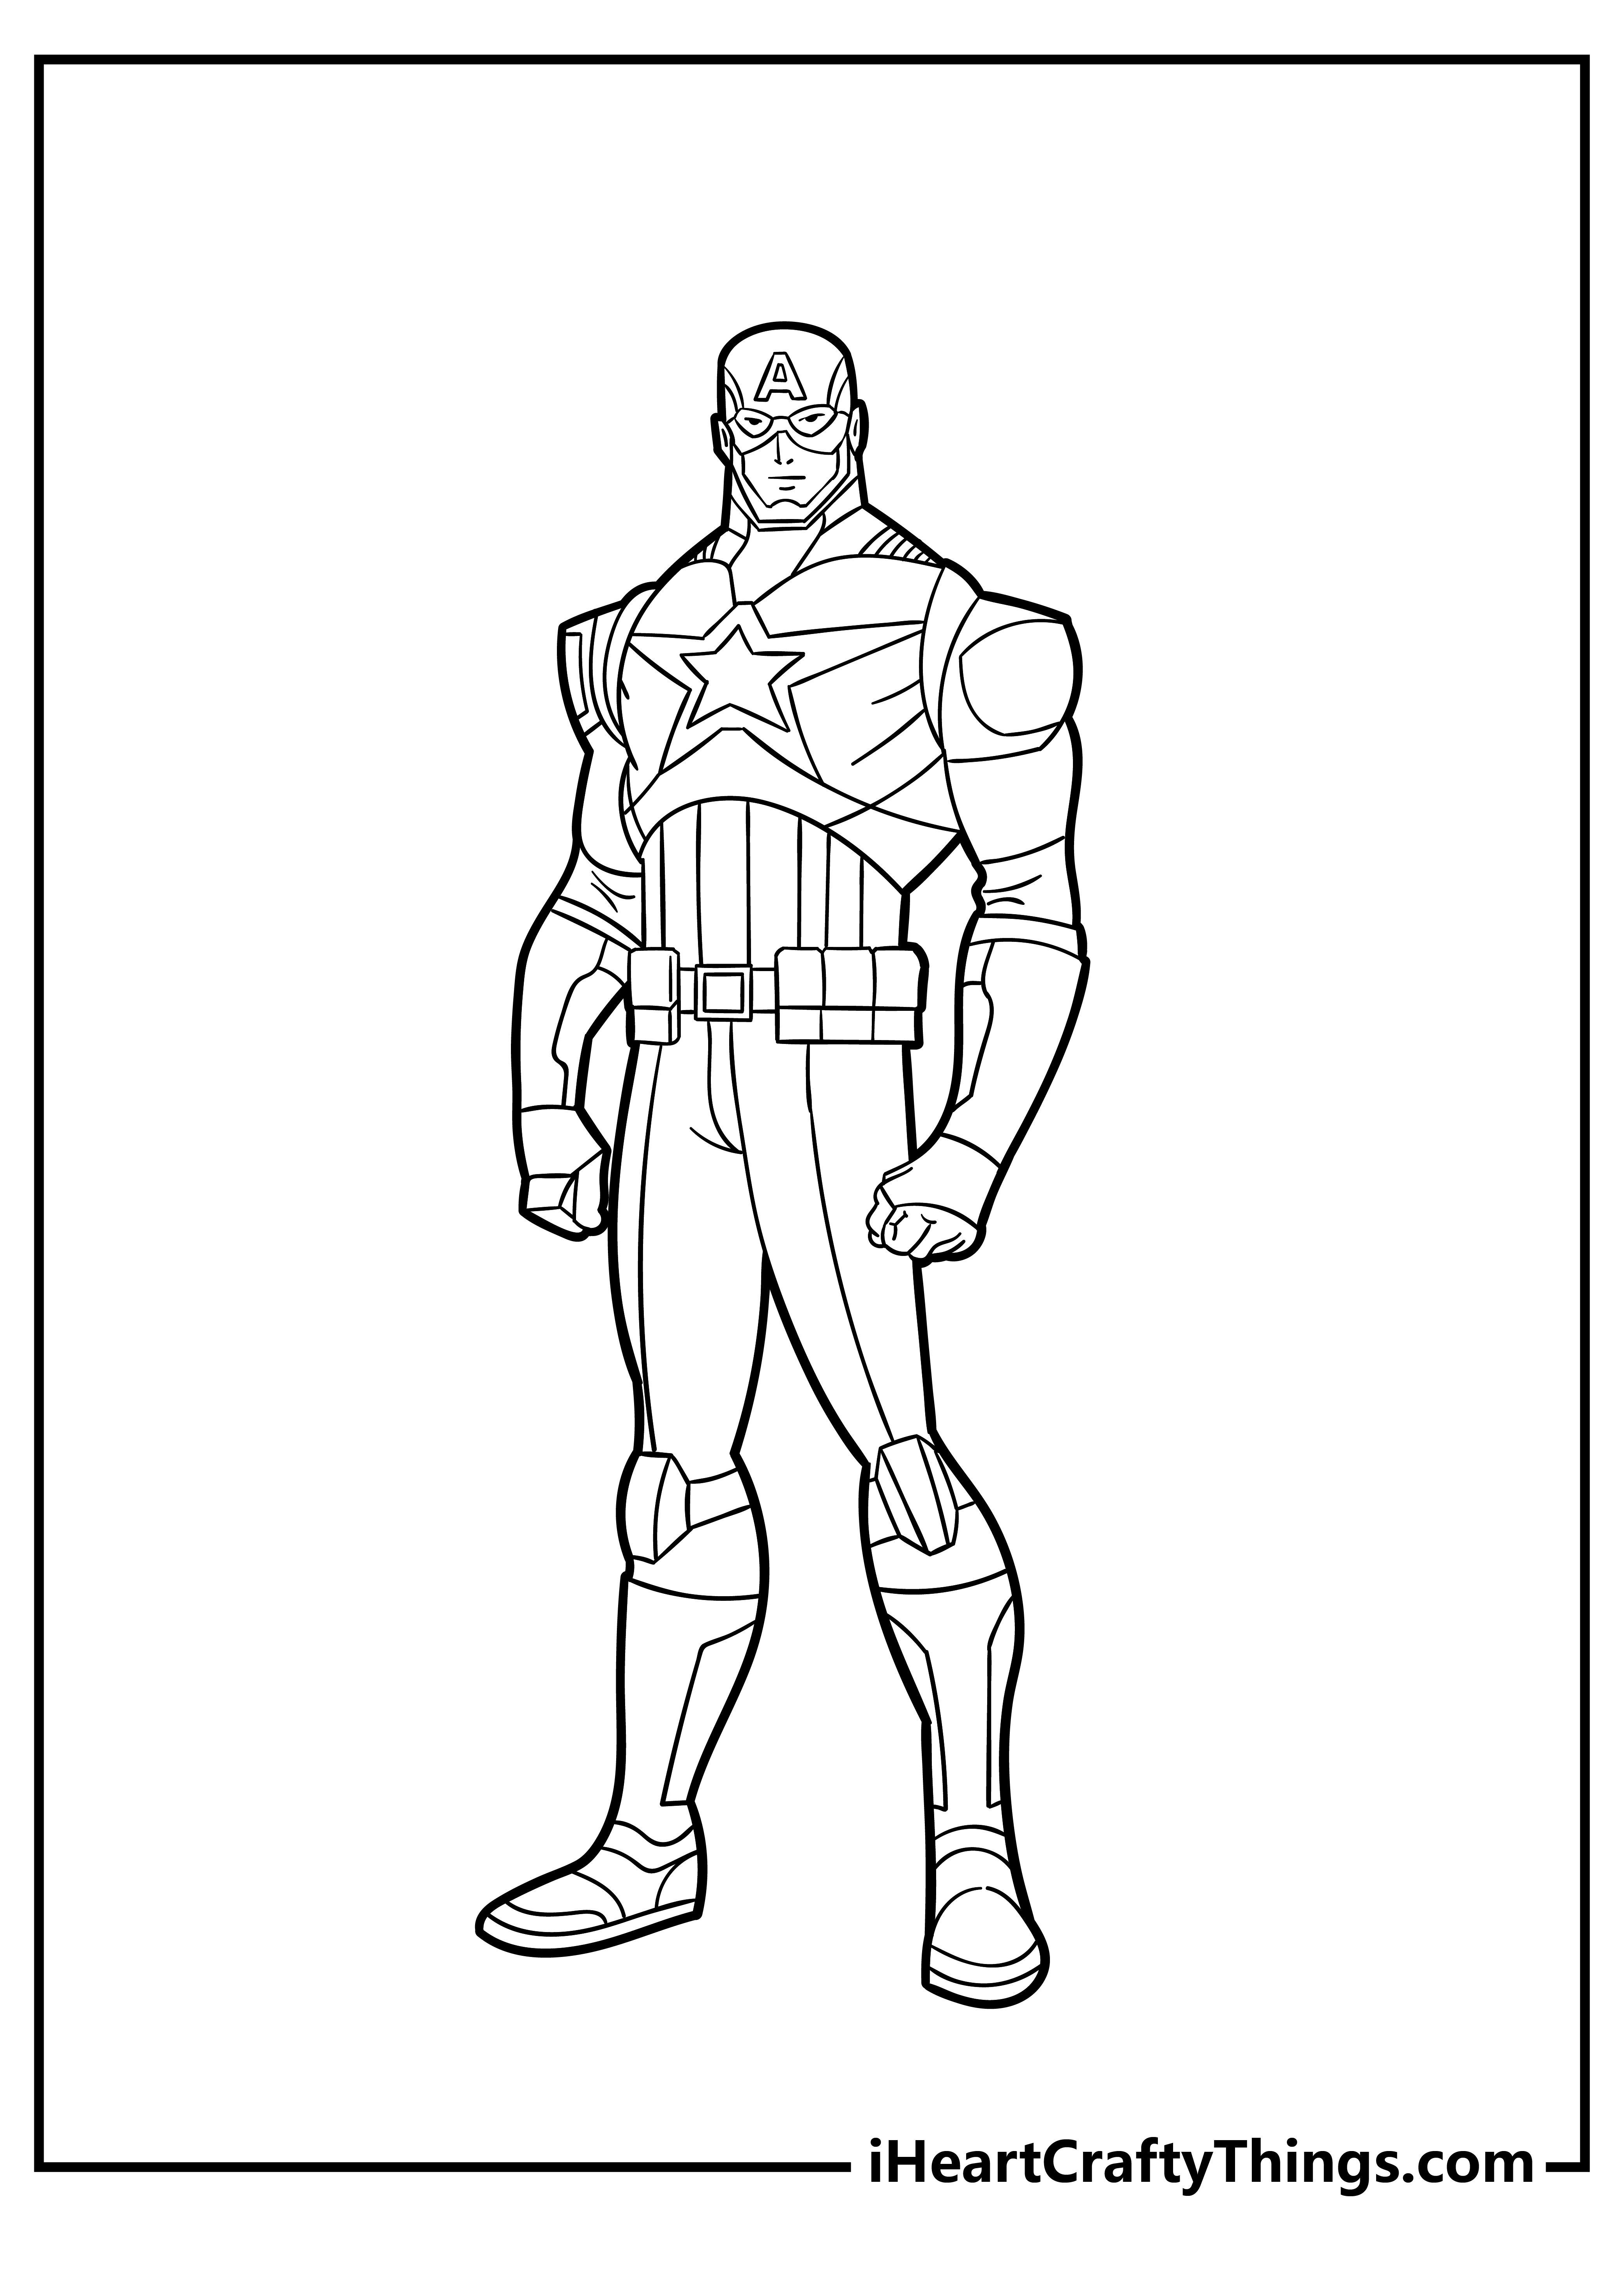 Captain America Coloring Pages for adults free printable